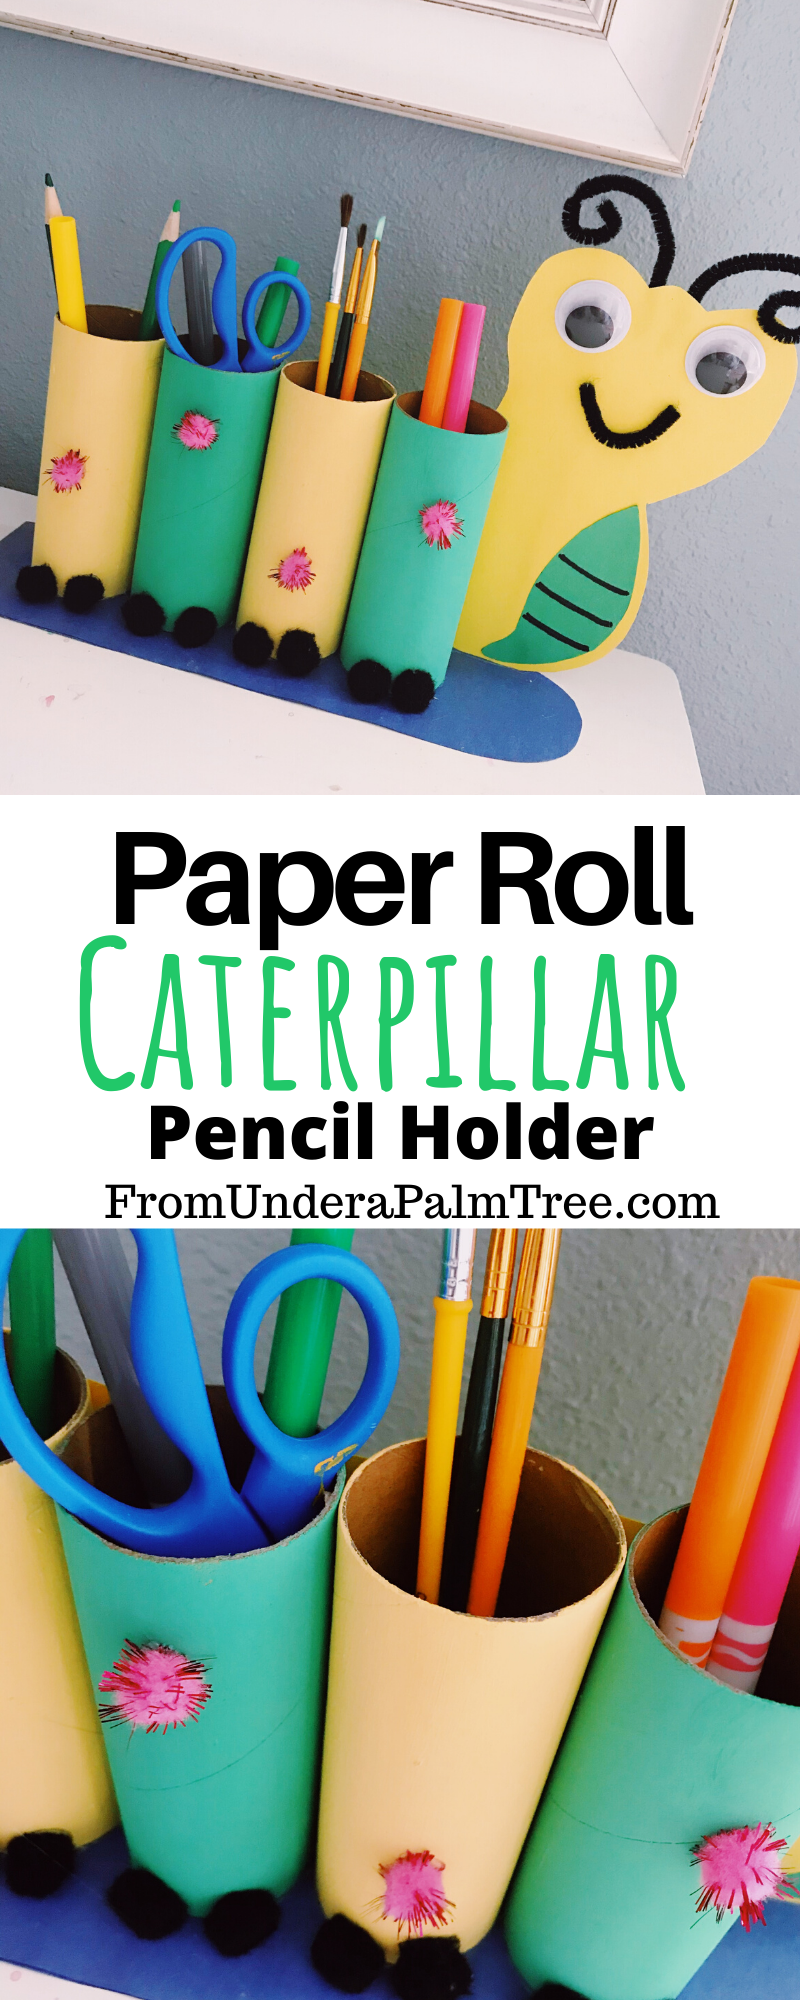 Paper Roll Caterpillar Pencil Holder From Under A Palm Tree